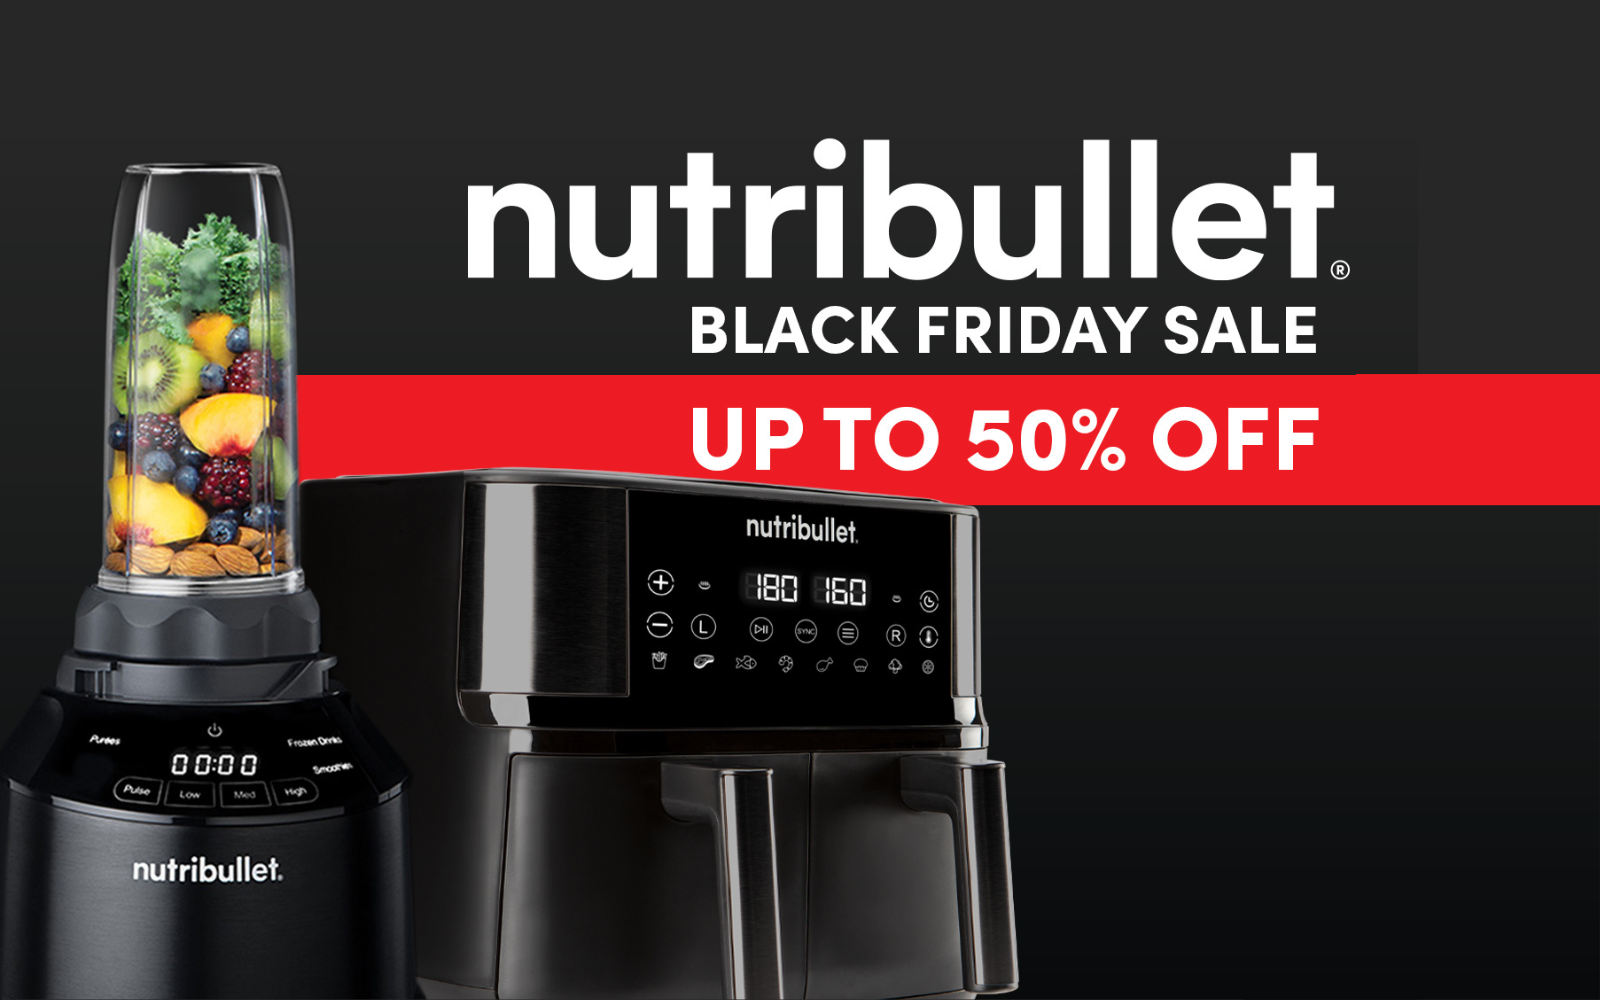 Introducing the new nutribullet® Ultra. 